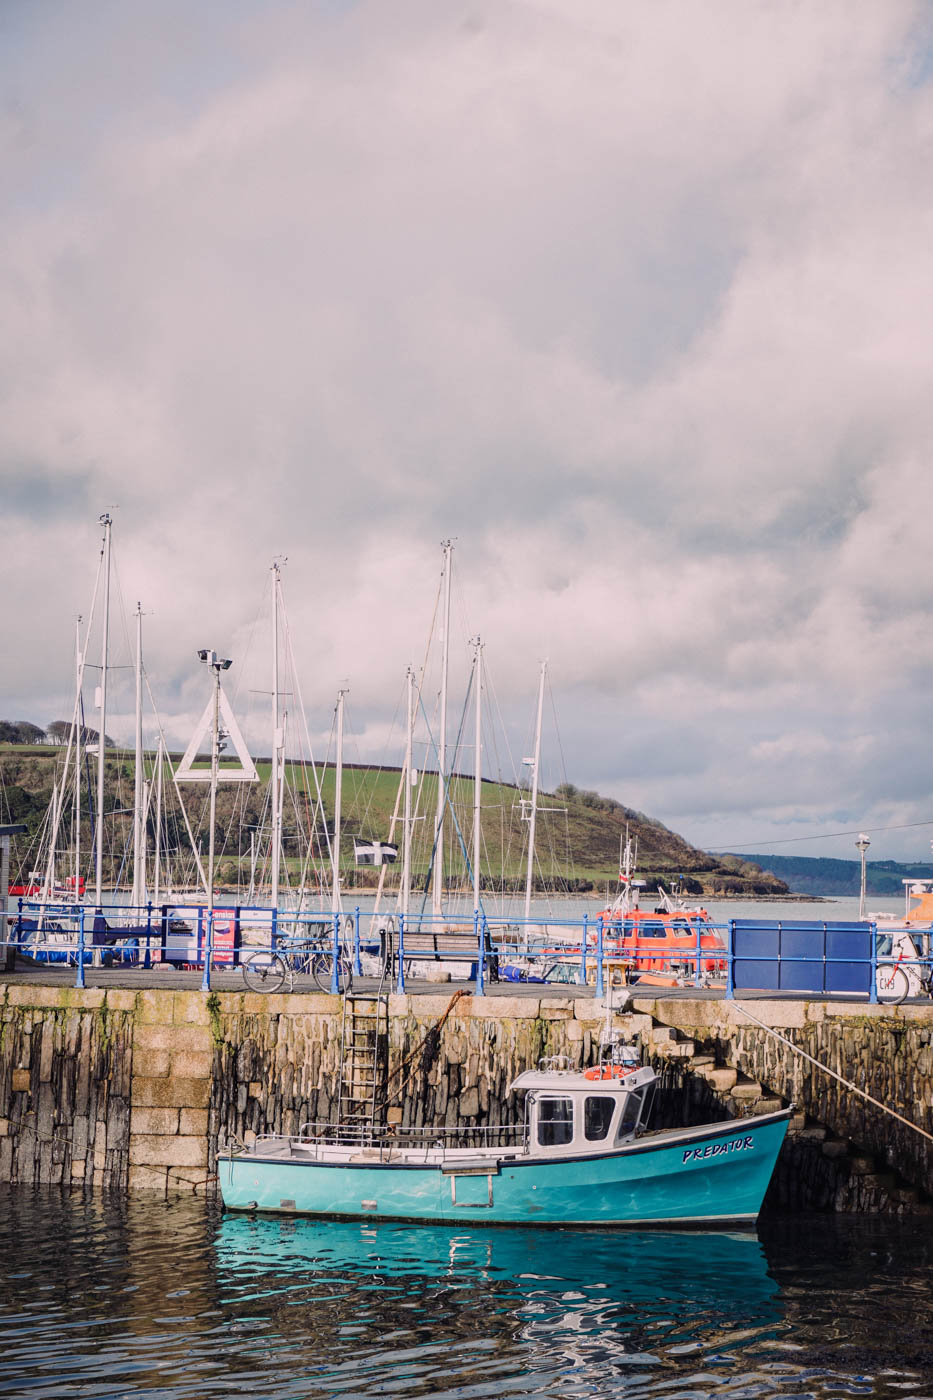 Falmouth - A great Cornish destination for your UK bucket list